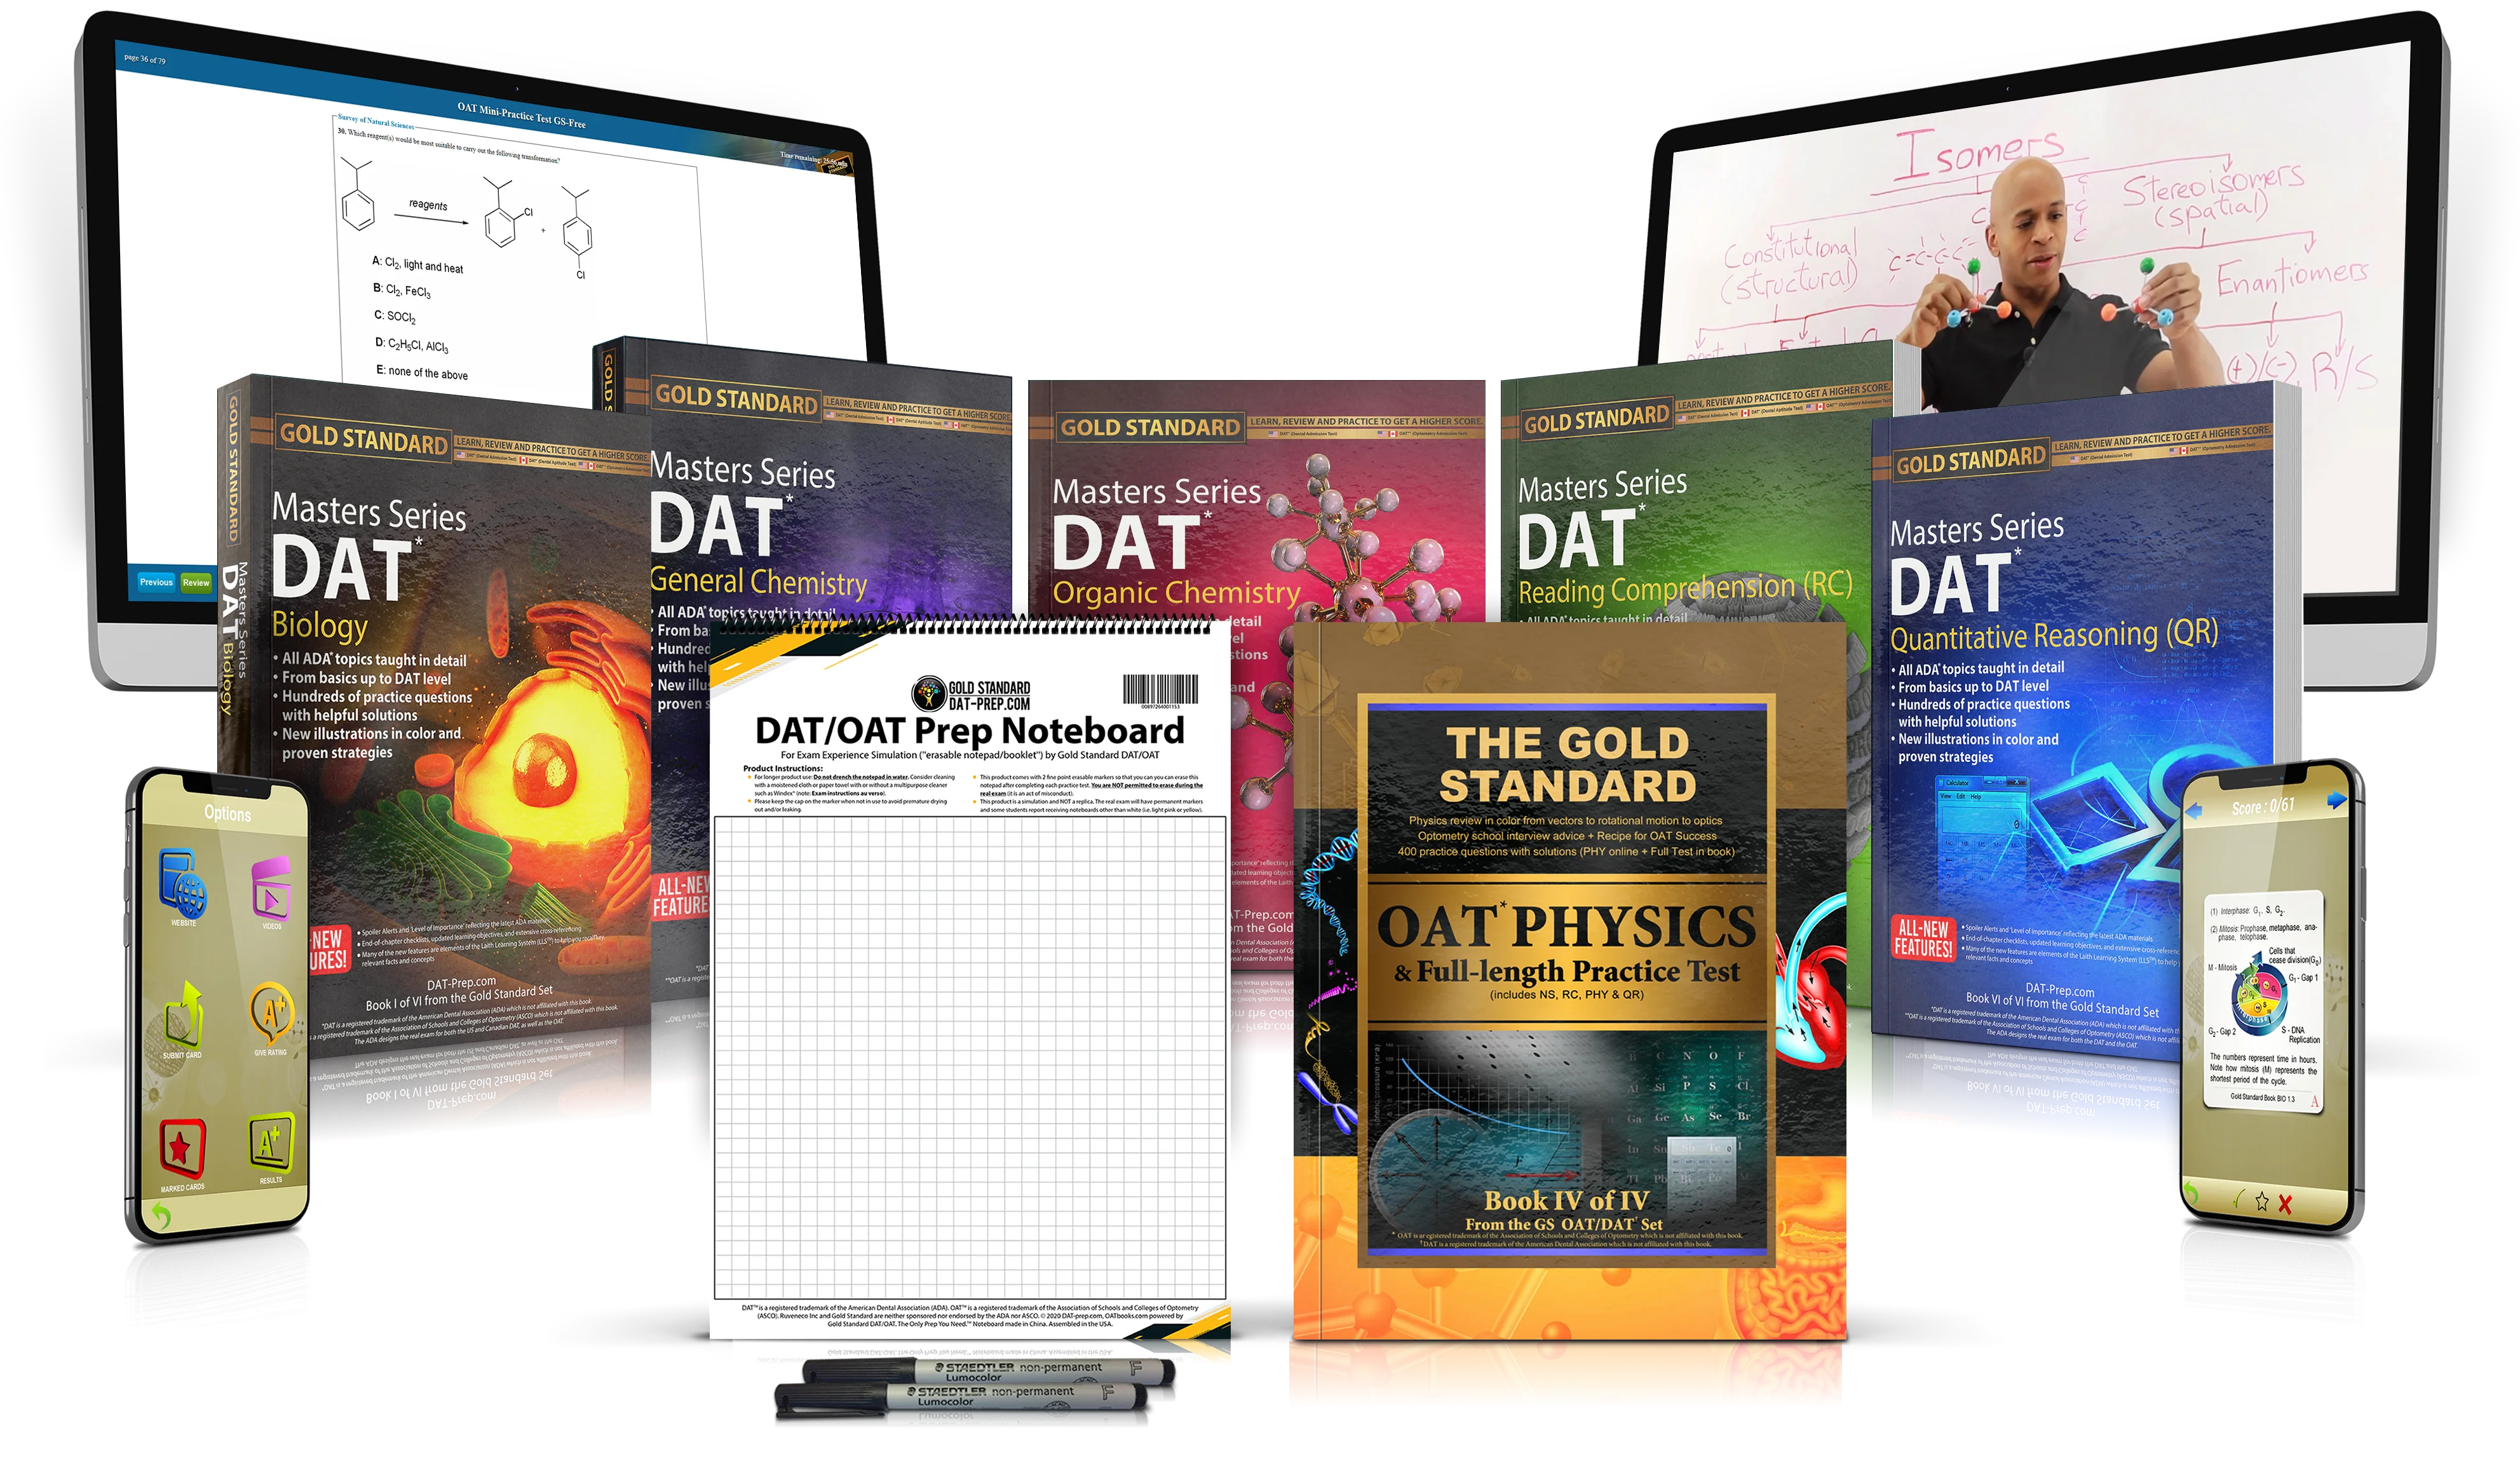 Complete OAT Prep Review: Home Study Course with 6 Full-length Practice Tests (6 Books, Online Videos, MP3s, Software for the Optometry Admission Test and Interview Online Video)